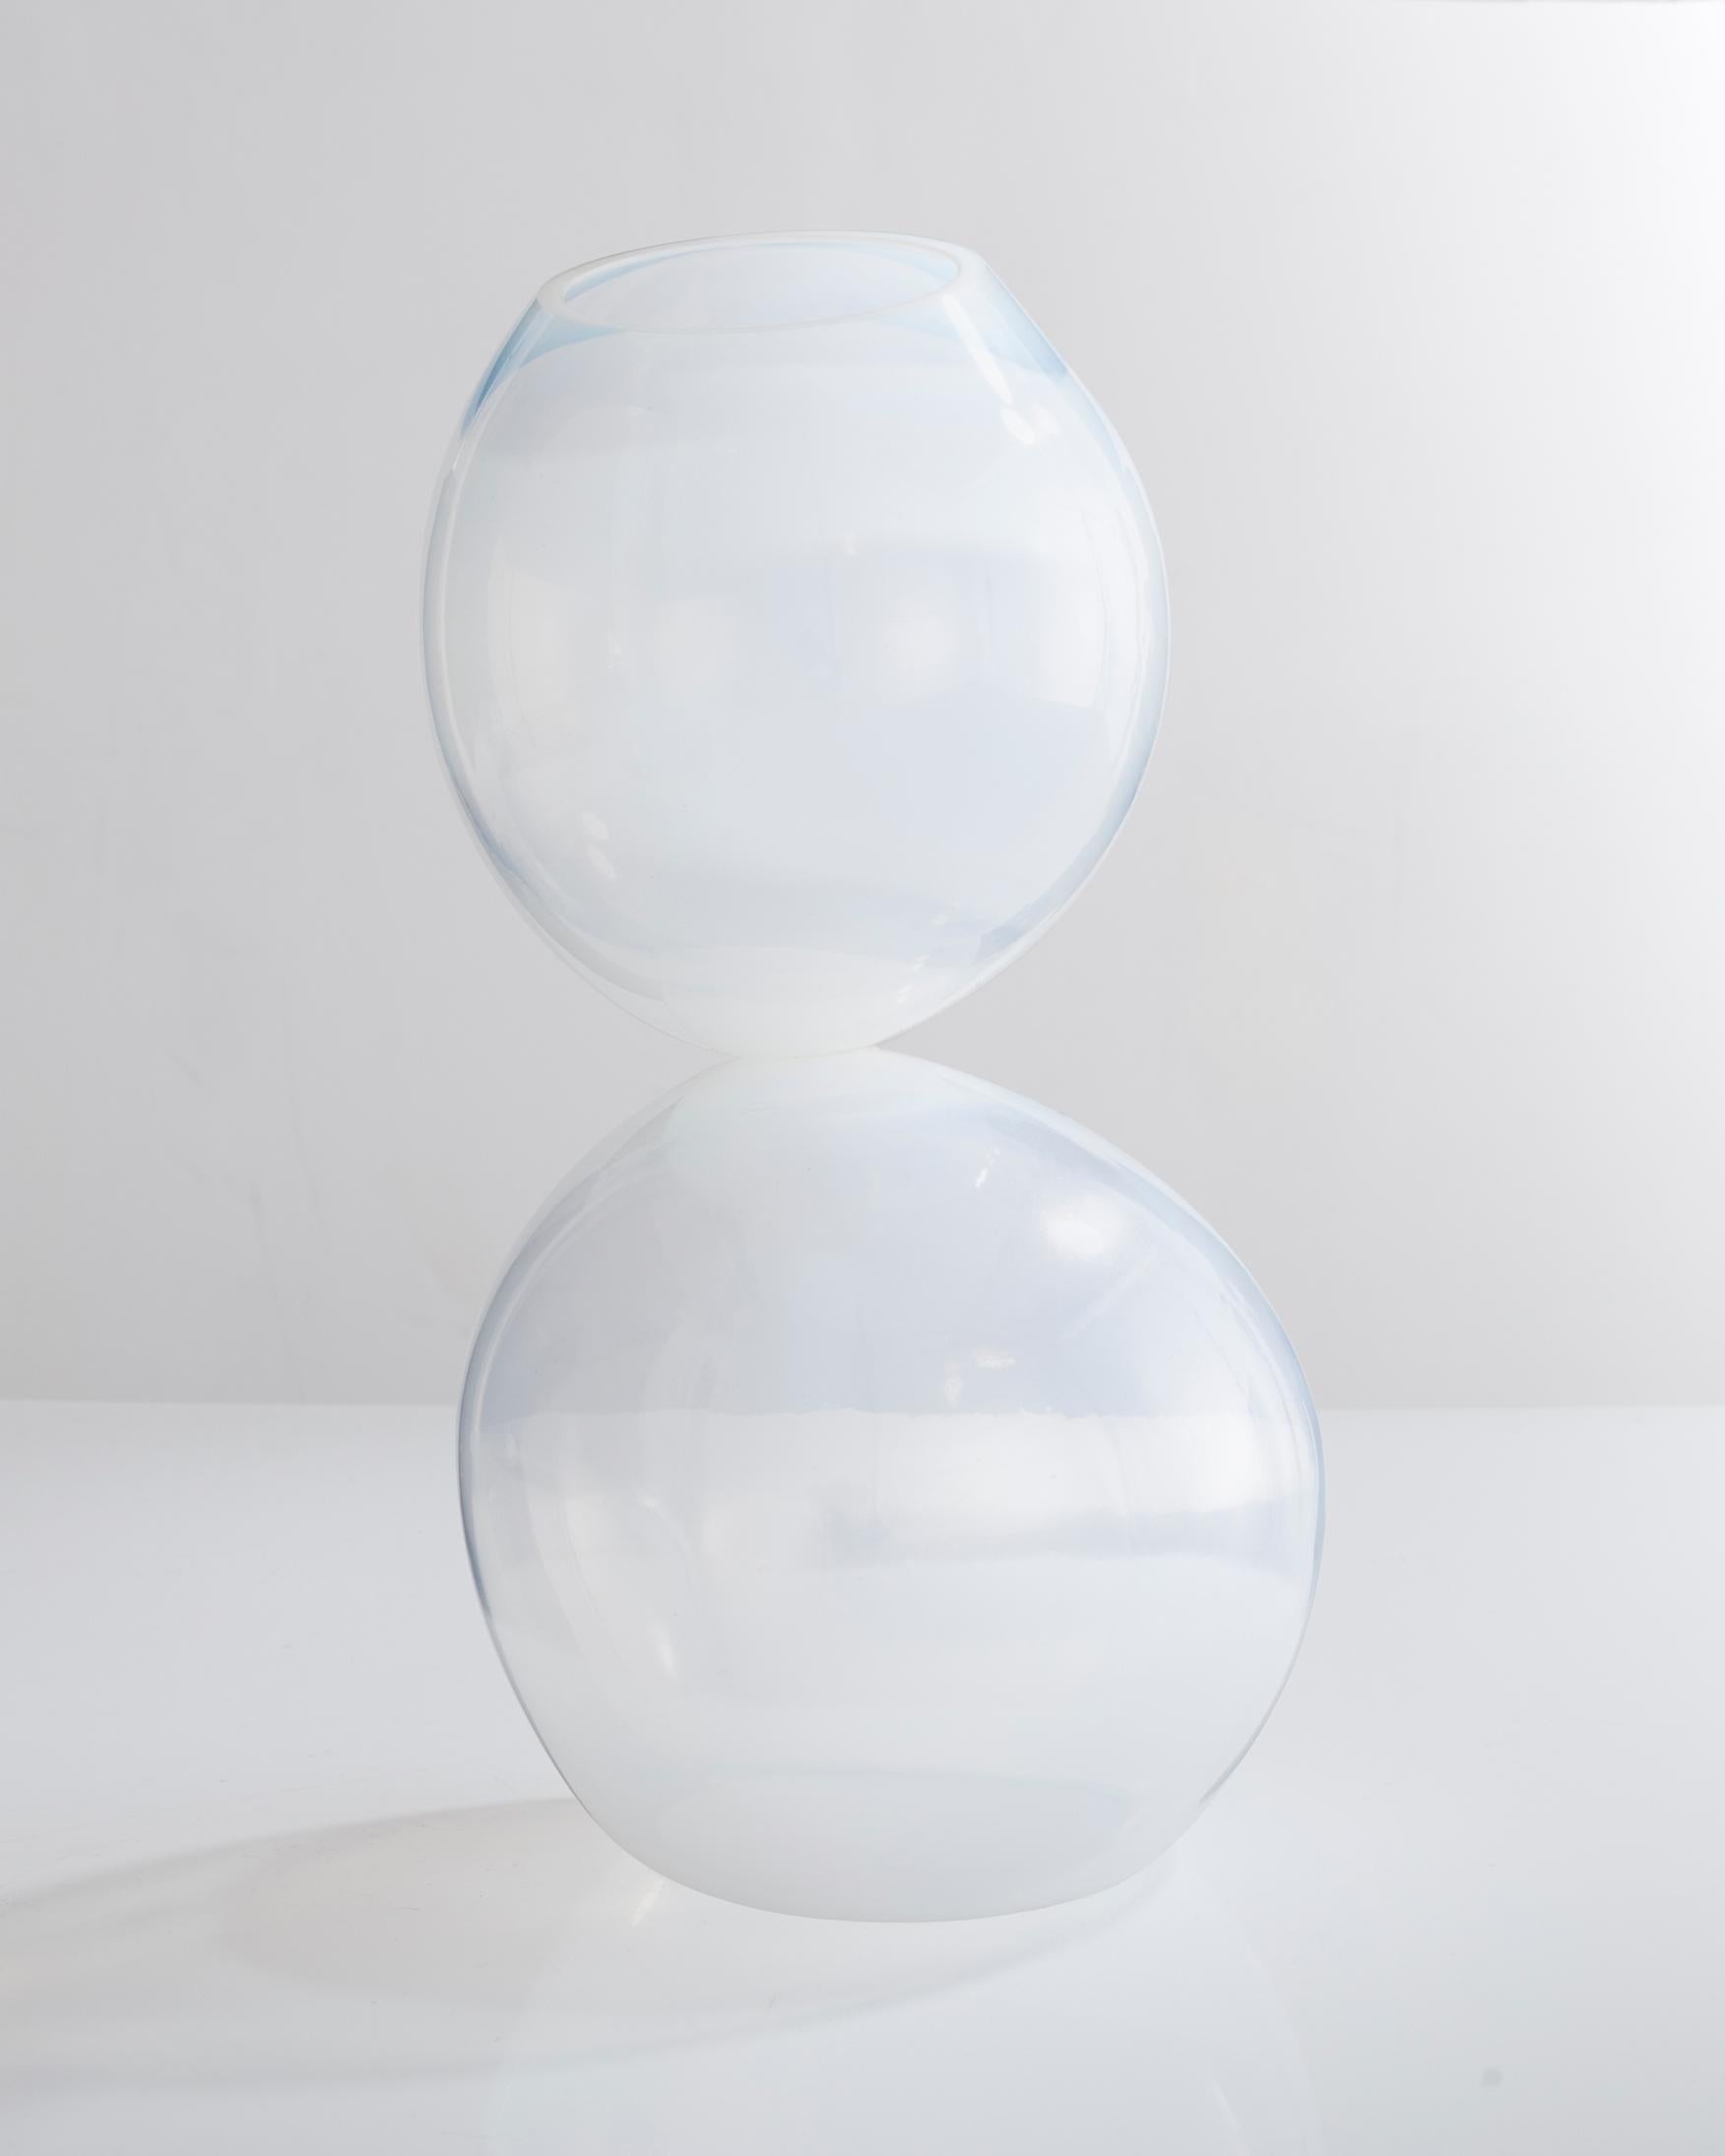 Unique stacked globe vessel in translucent hand blown glass. Designed and made by Jeff Zimmerman, USA, 2012.